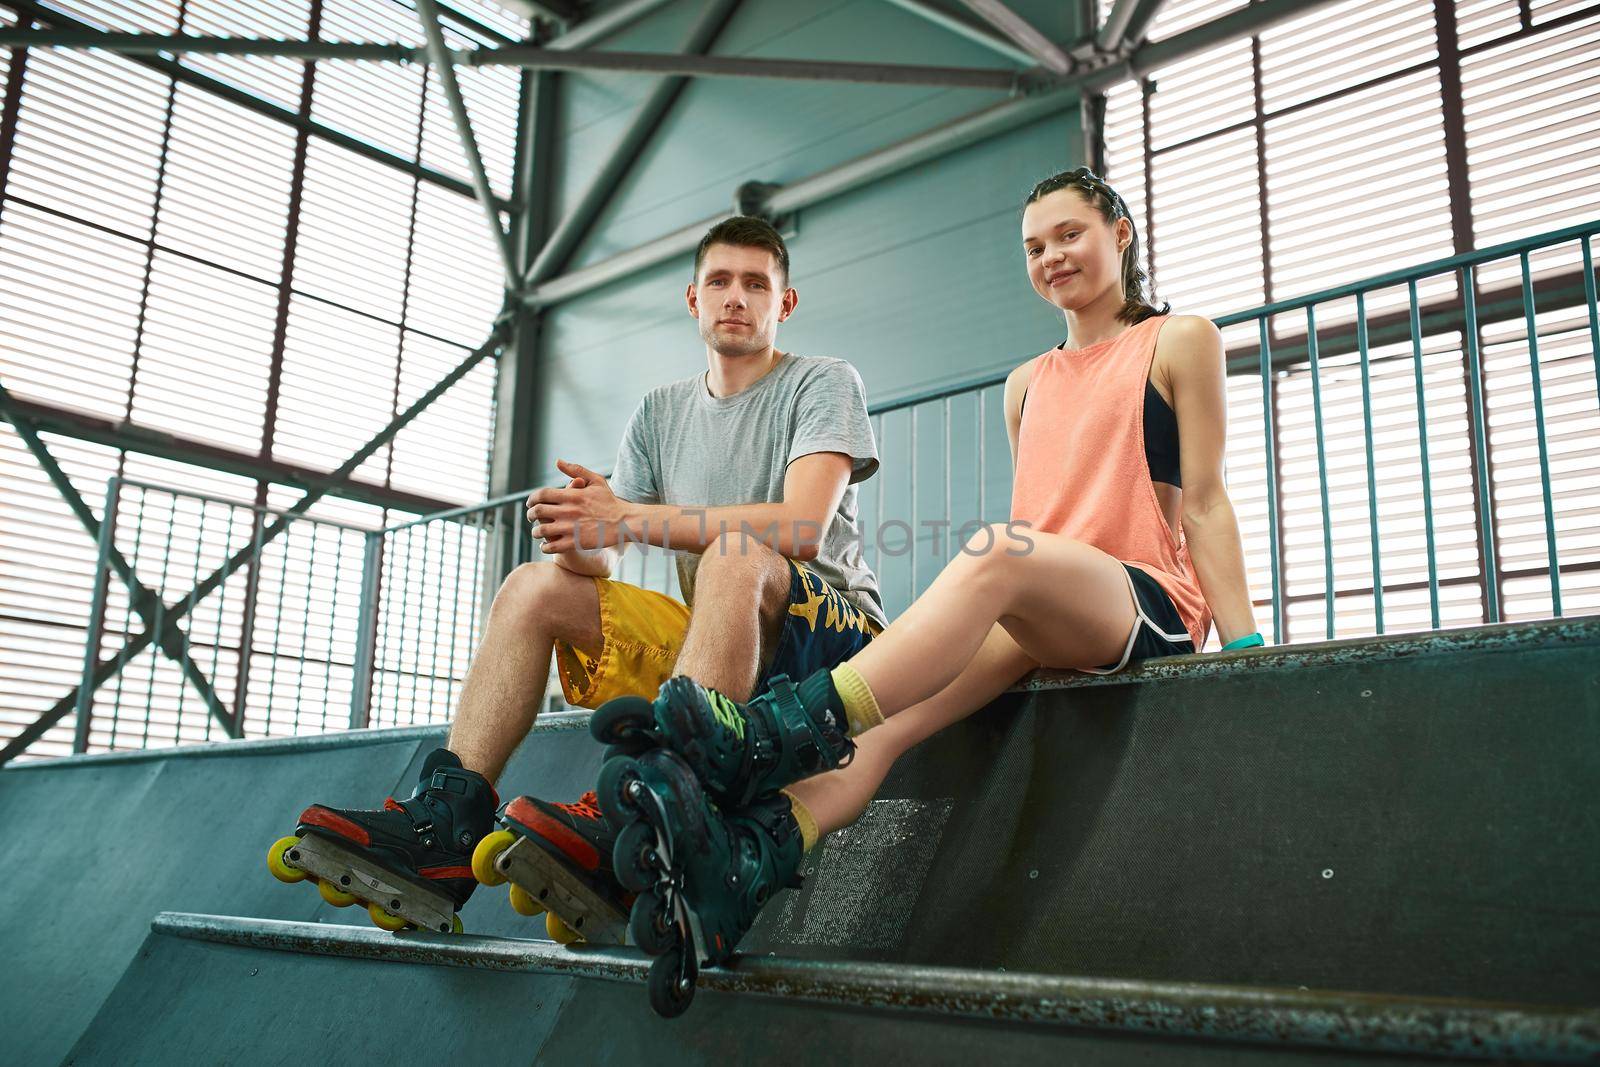 Young man and woman having fun on roller skates in skate park. Extreme sport competition. Indoors skate park equipment. Hobby